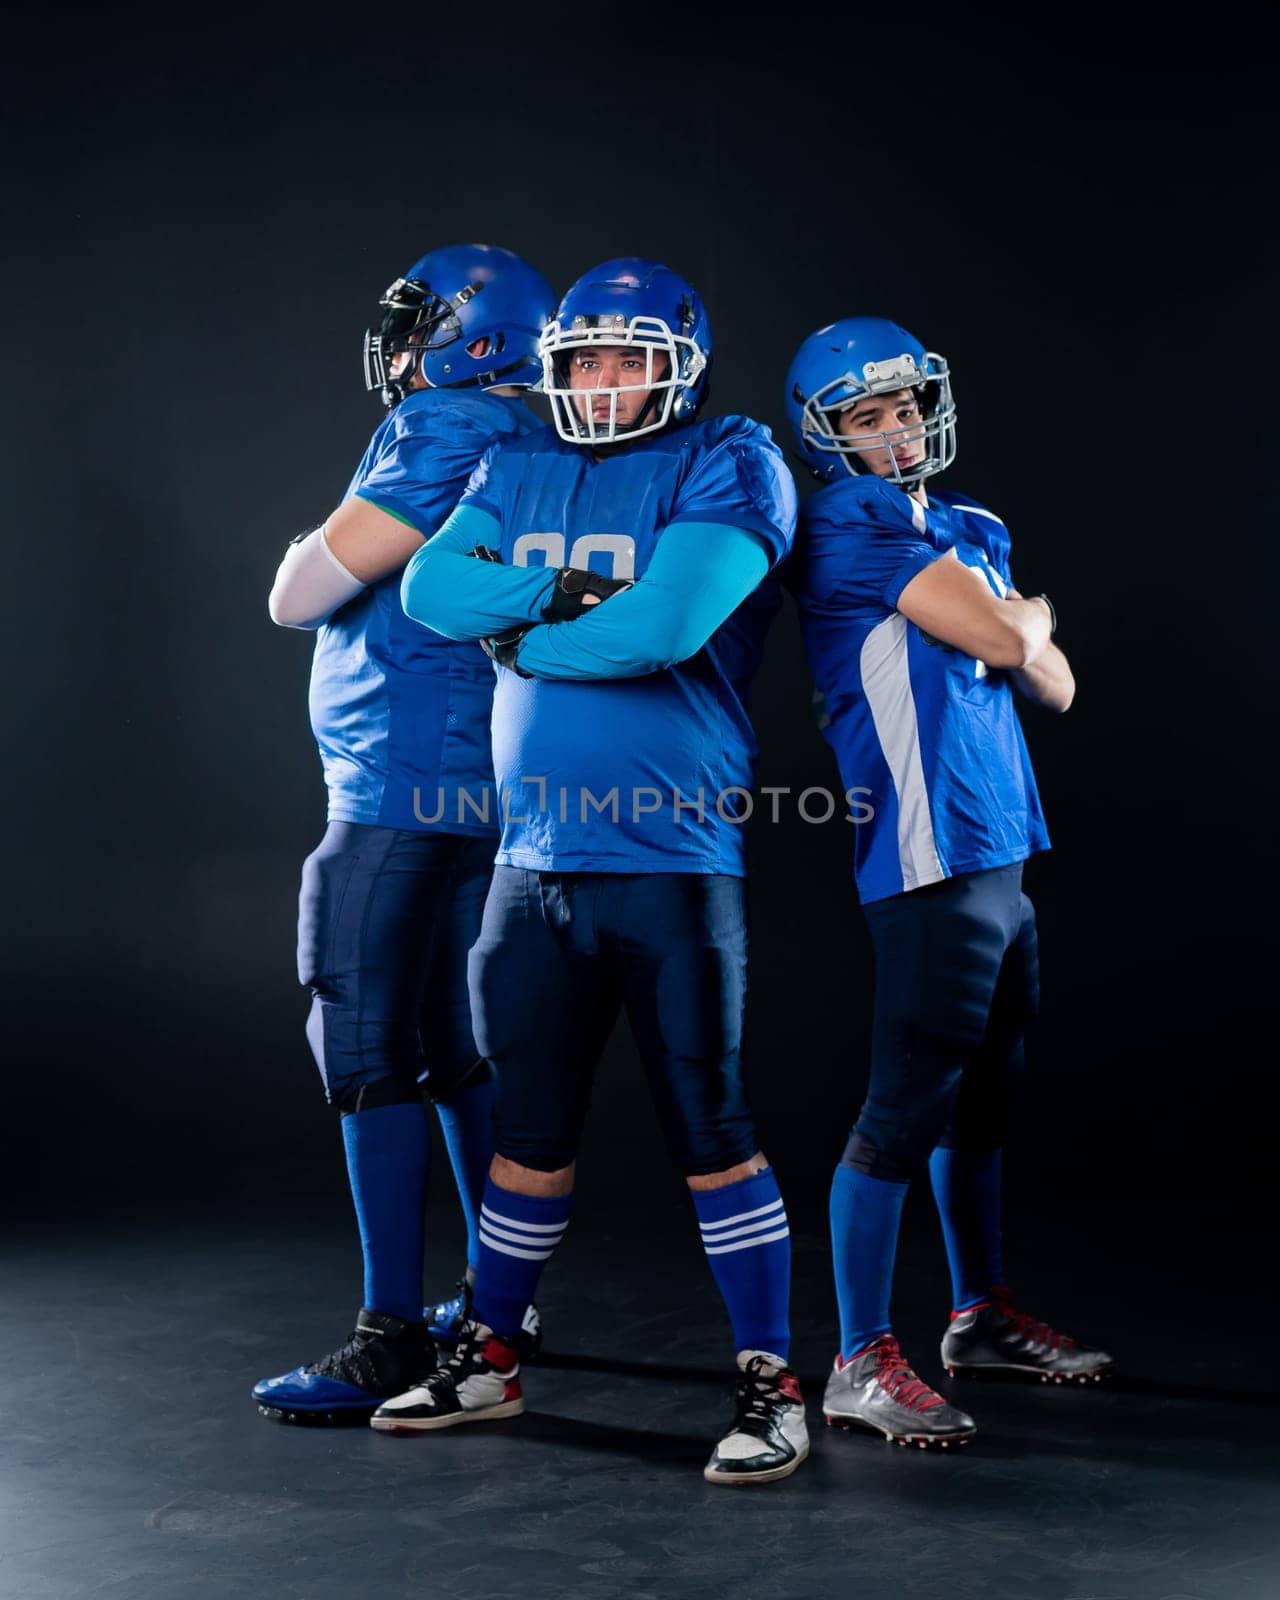 Portrait of three men in blue American football uniforms standing with their arms crossed over their chests on a black background